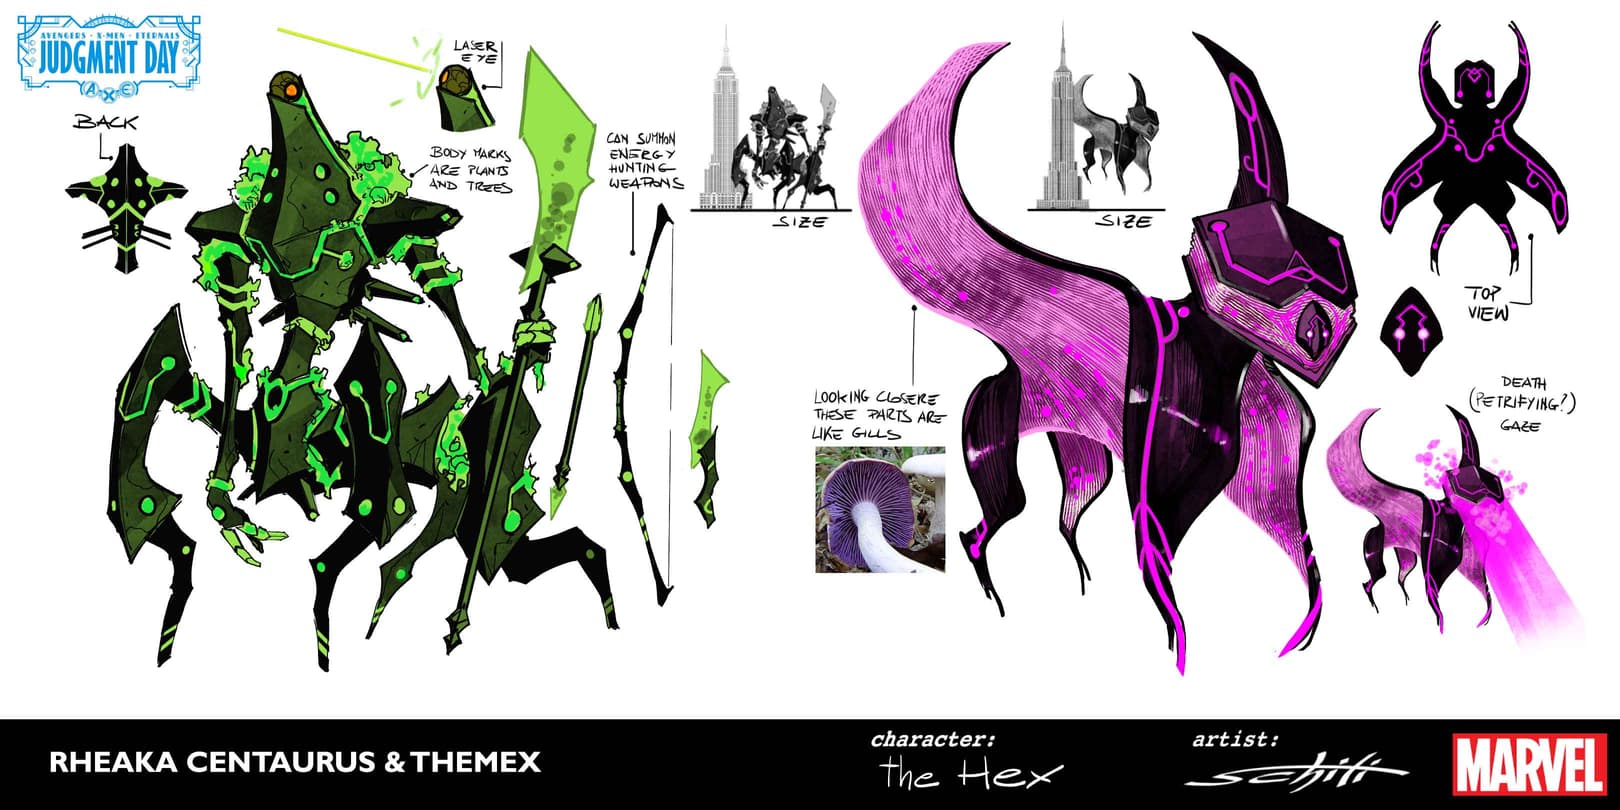 A.X.E.: JUDGMENT DAY - The Hex character designs by Valerio Schiti